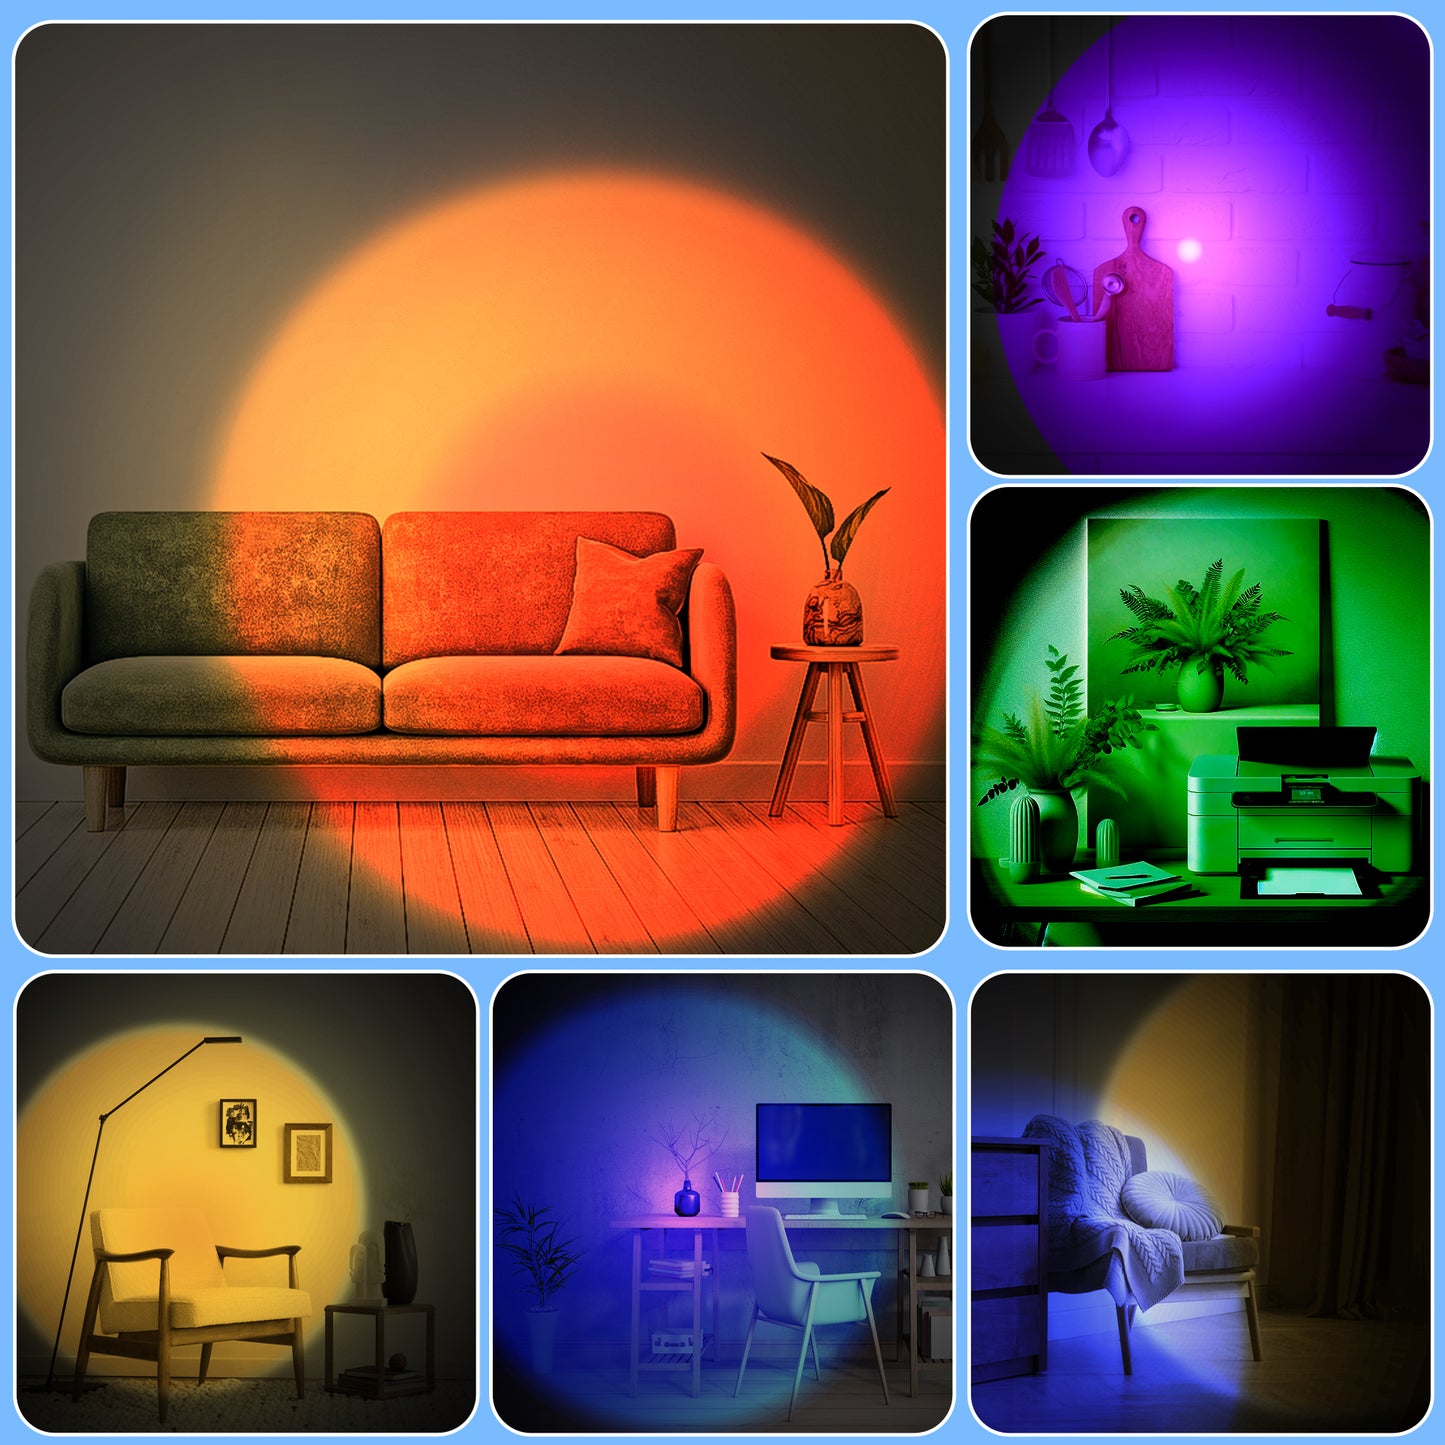 LITRONICS Sunset LAMP, Night Light 360 Degree Rotation, Romantic Visual with USB, Room DÉCOR and Floor LAMP with 15+ Colours, Remote Control LAMP for Festival, Party and TIKTOK Photography